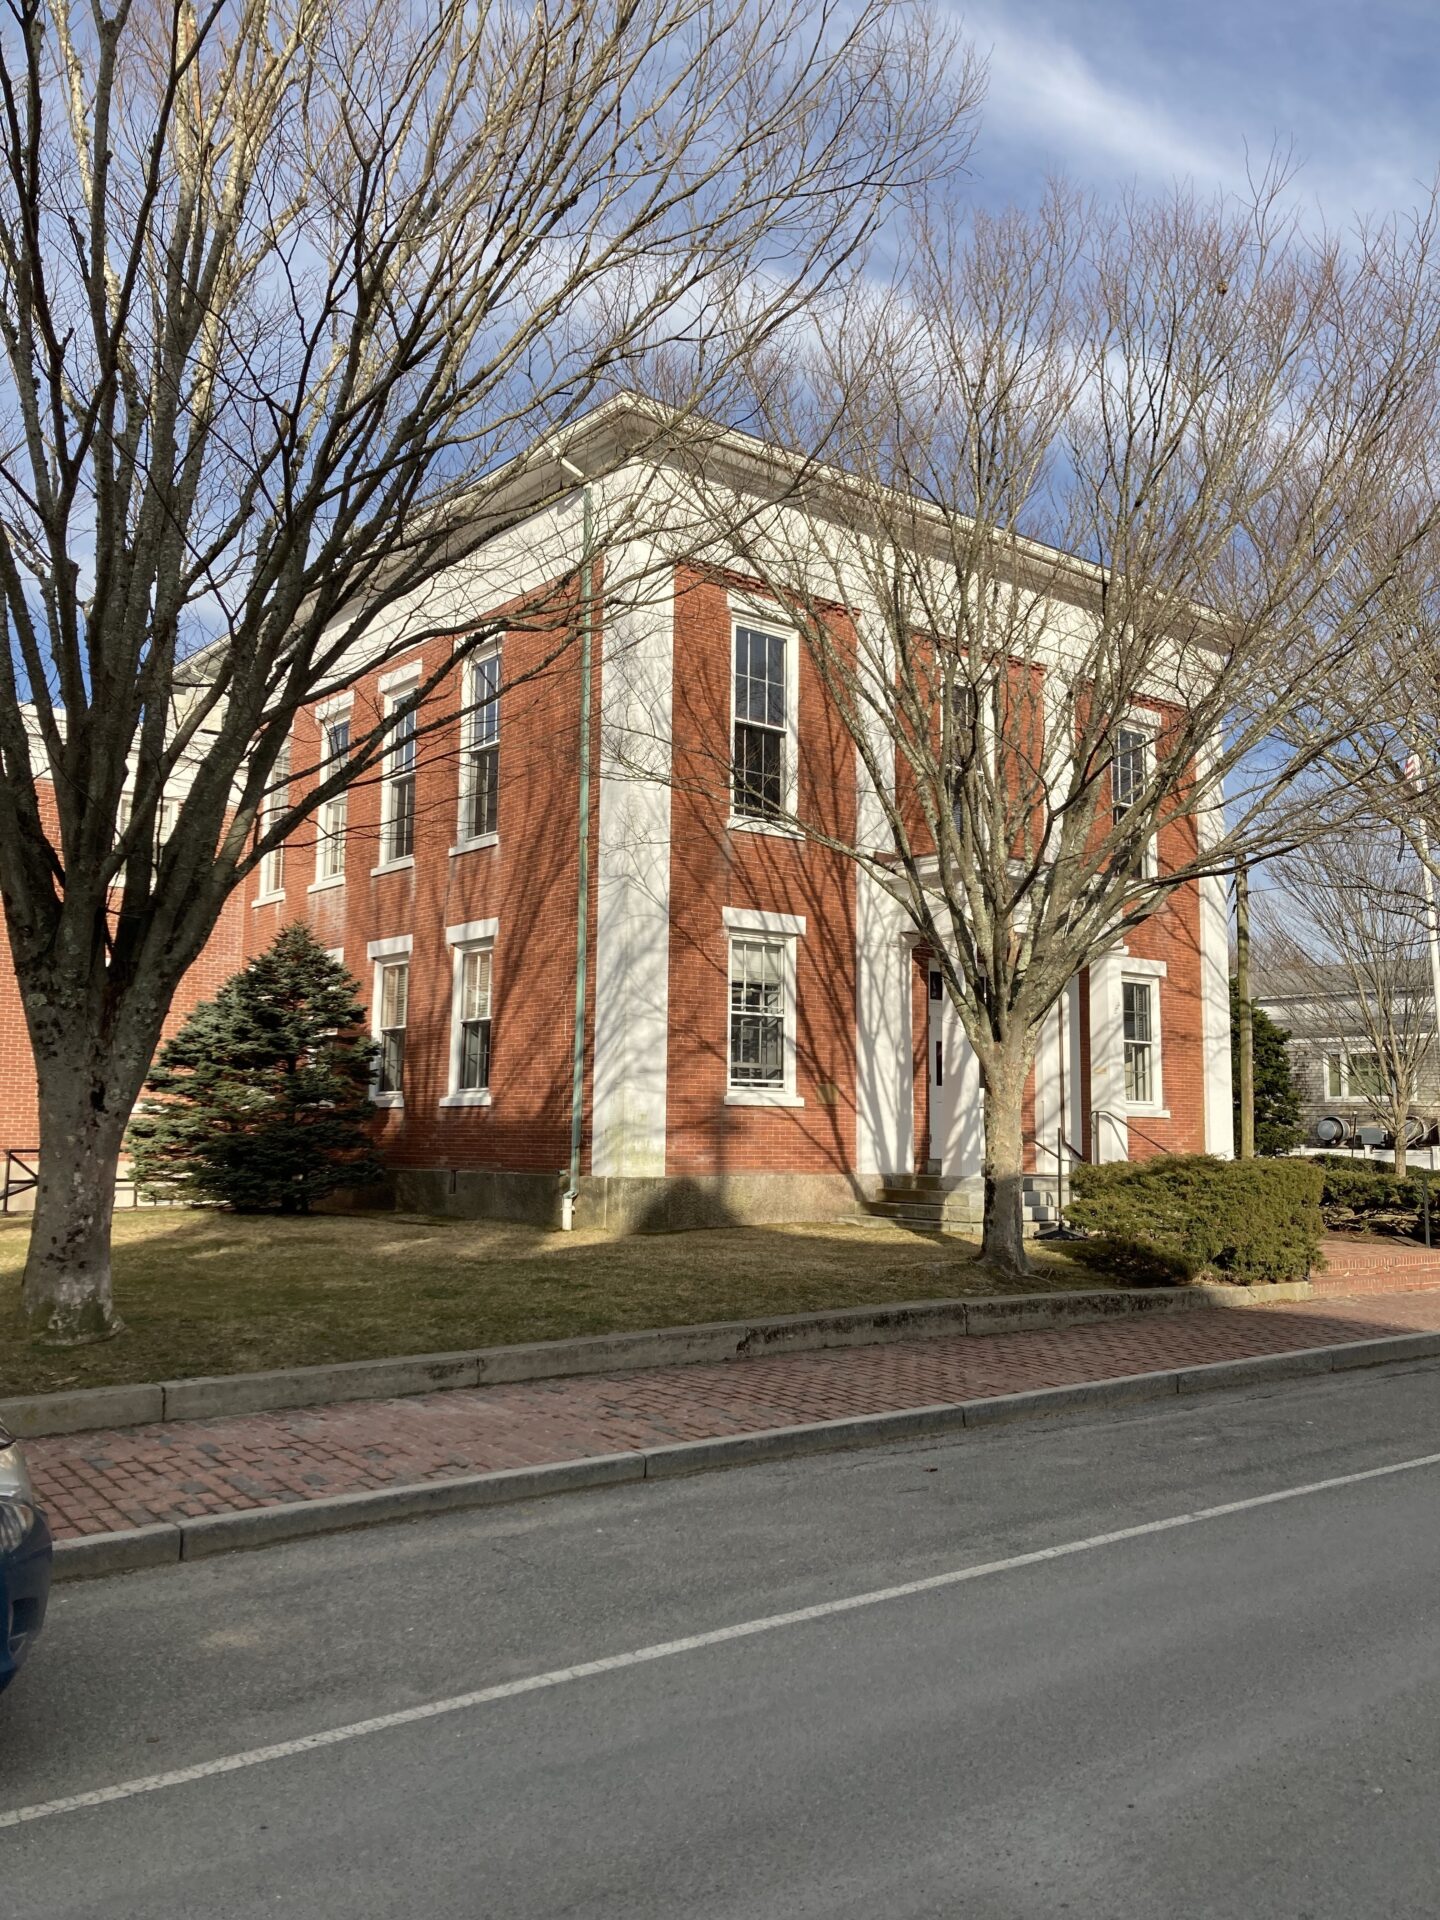 A red brick building with trees in front of it.